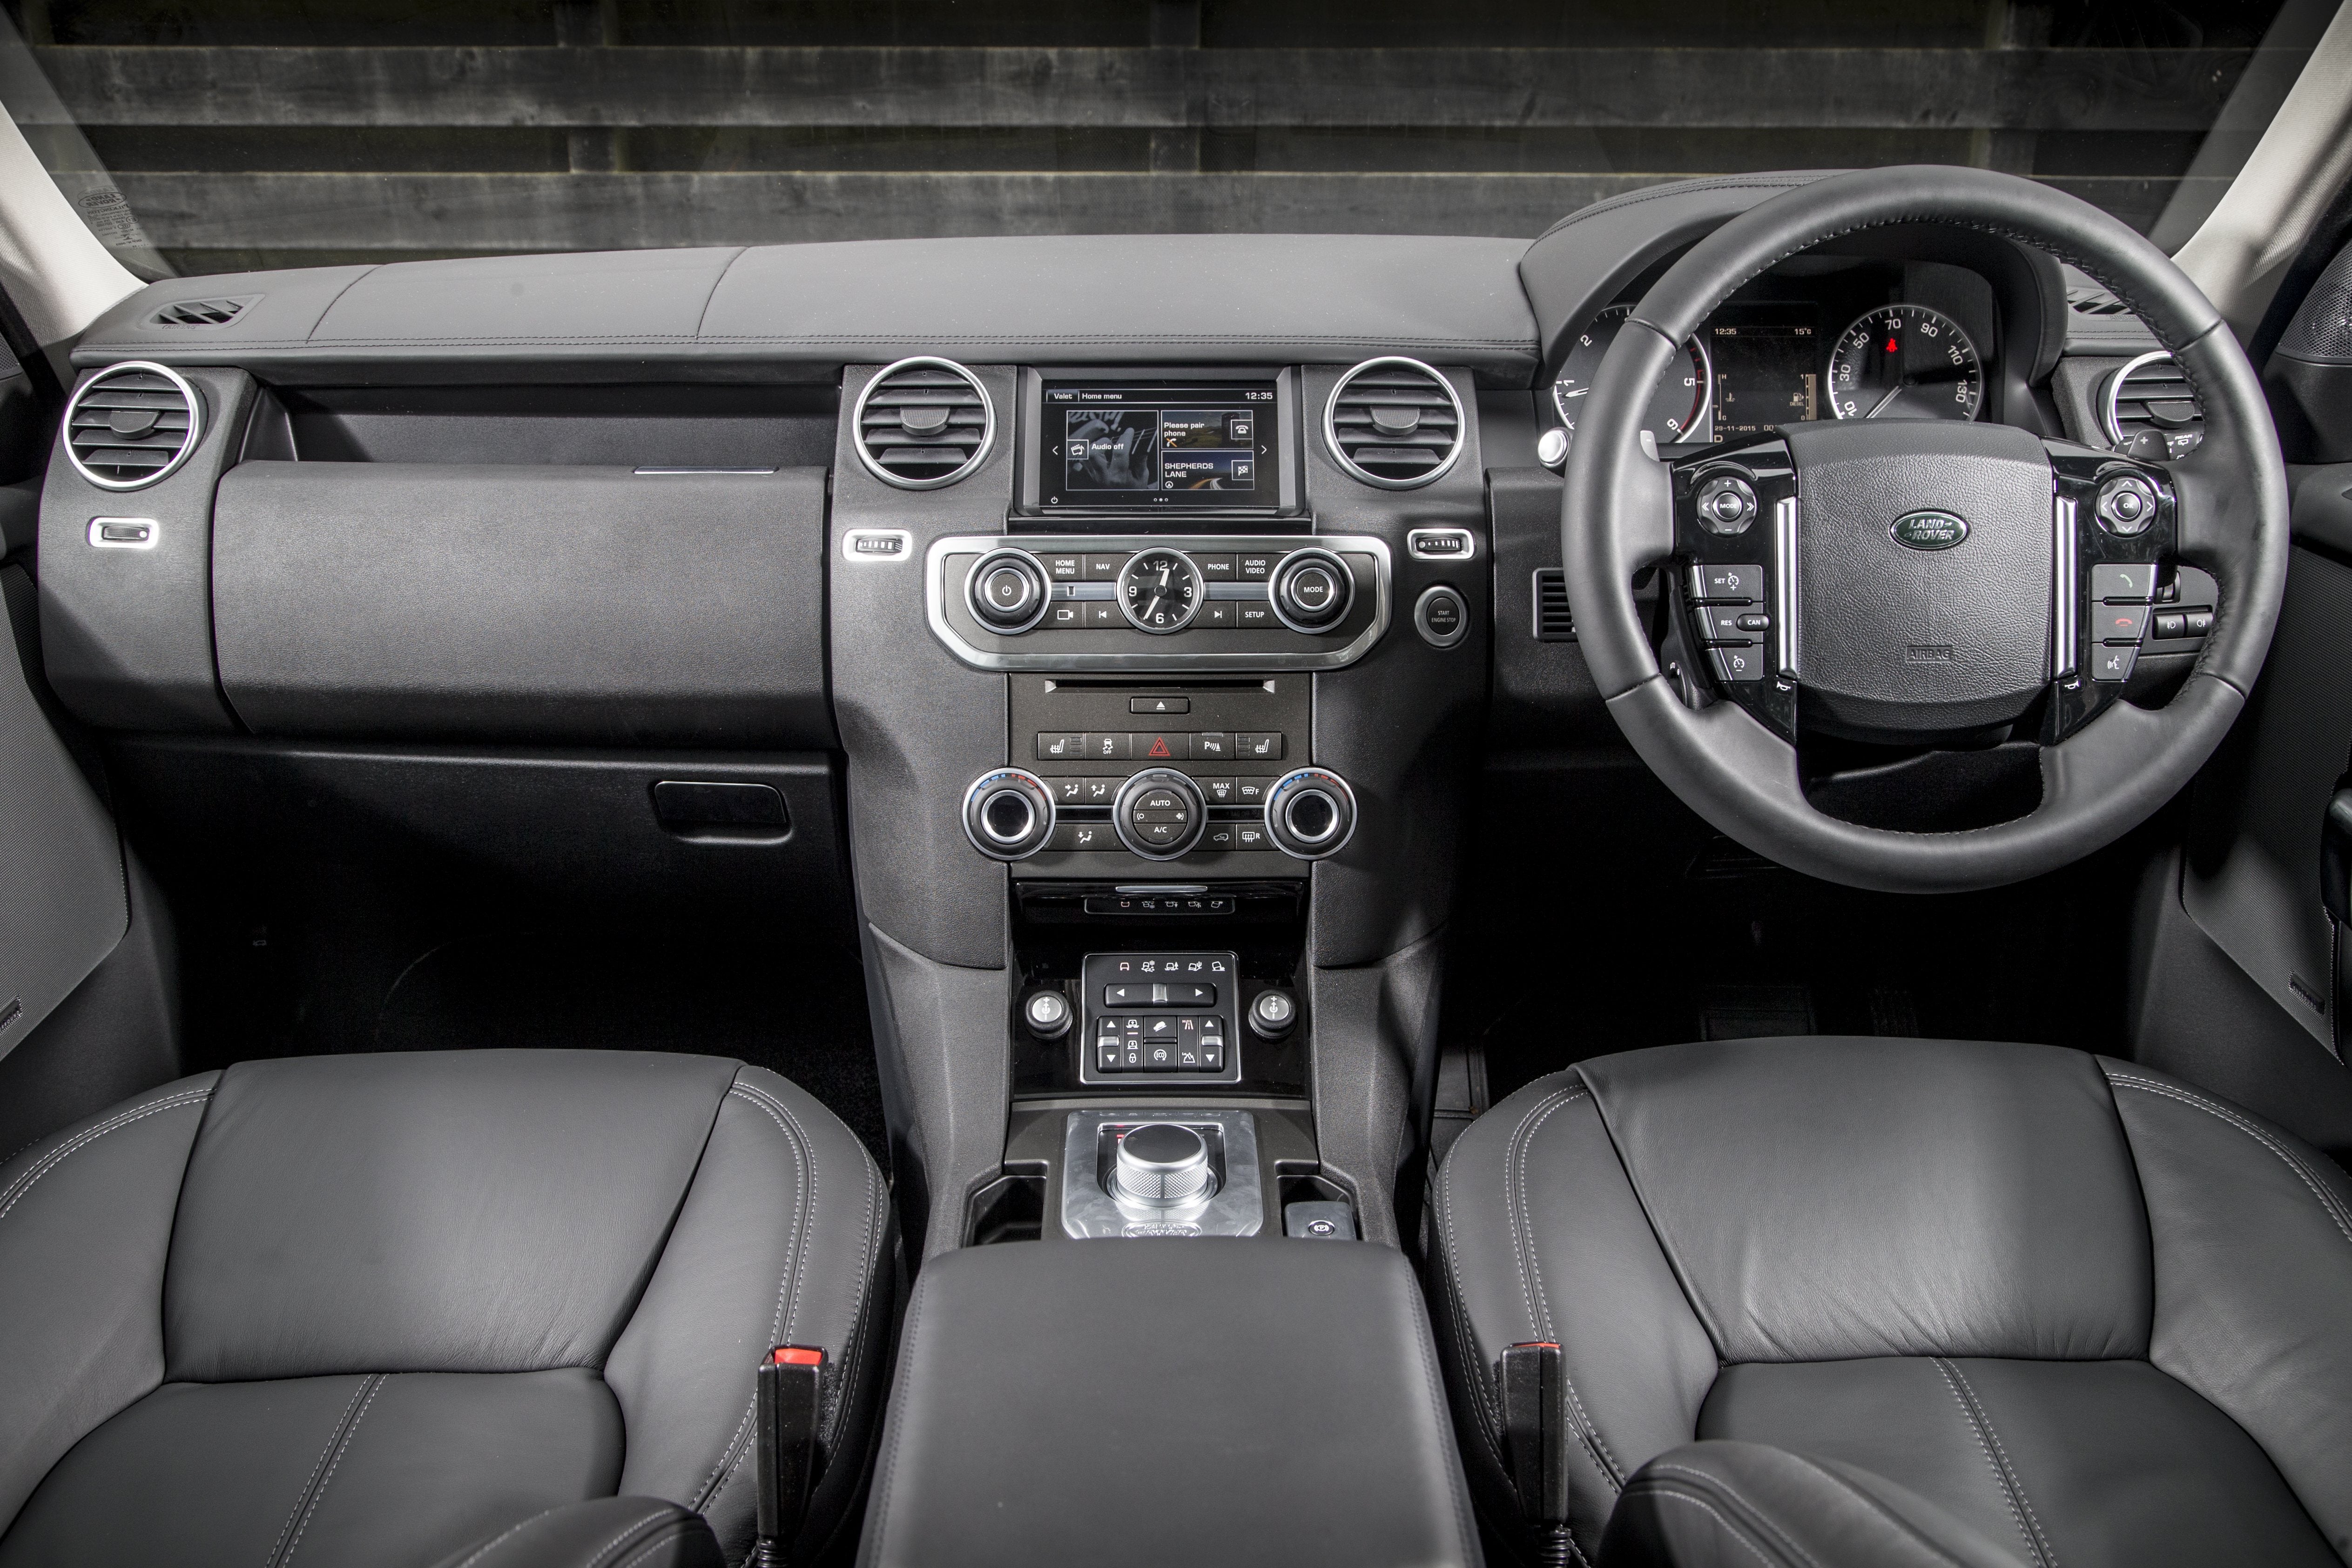 Land Rover Discovery 2009 front interior